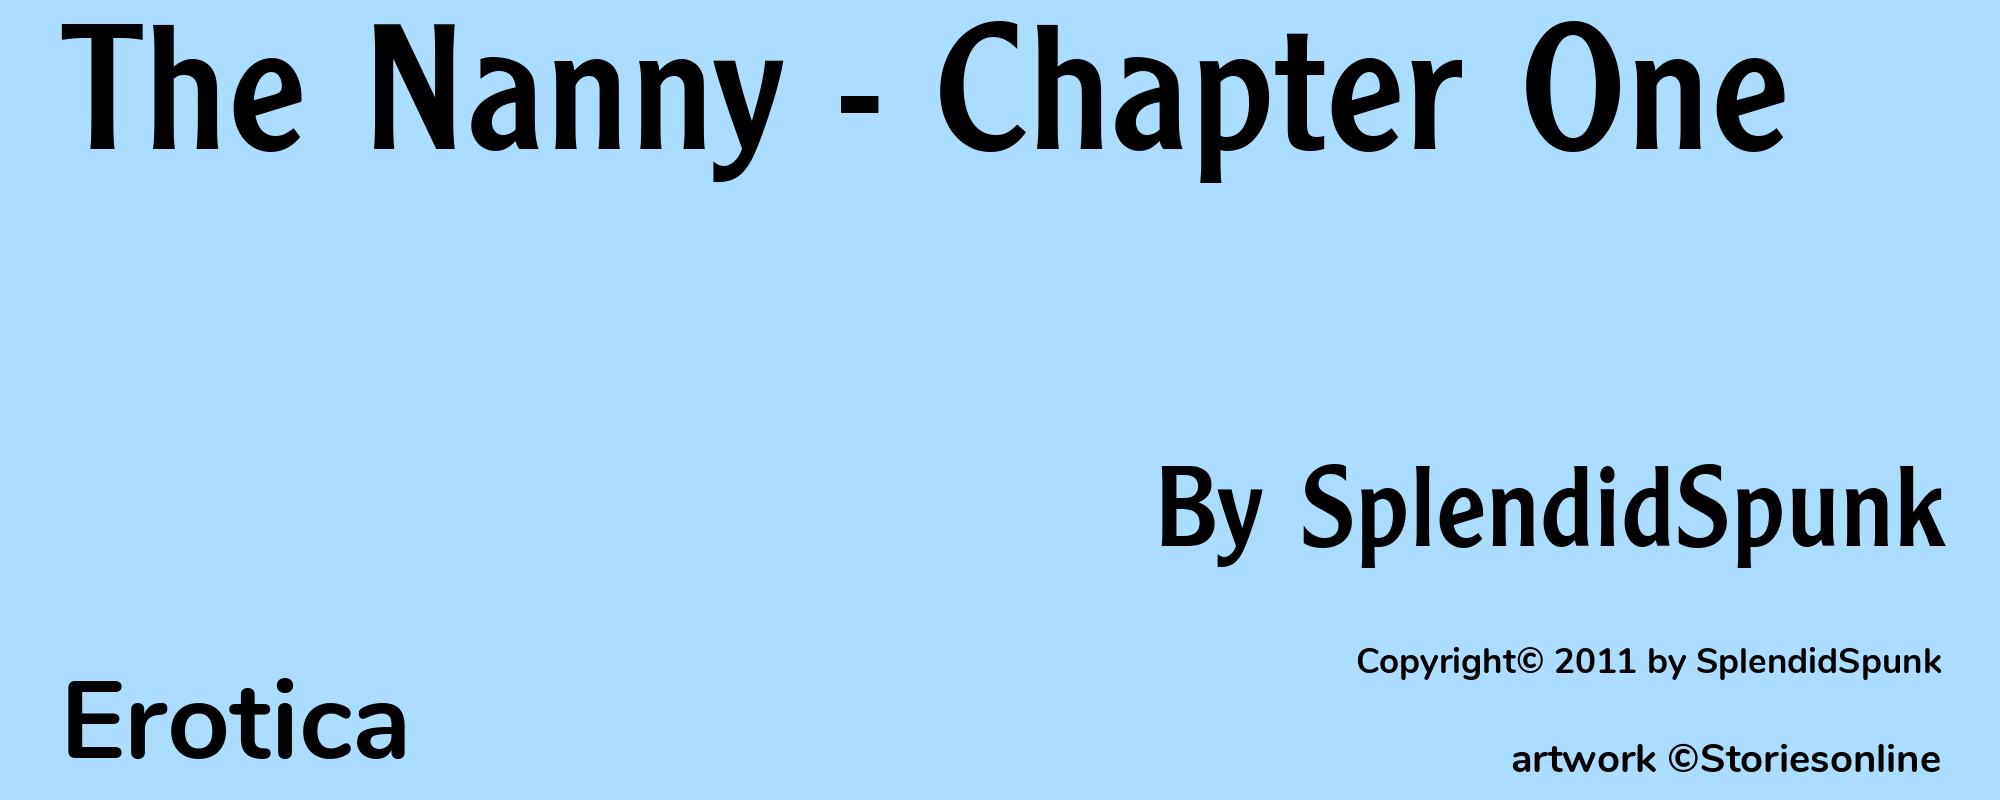 The Nanny - Chapter One - Cover